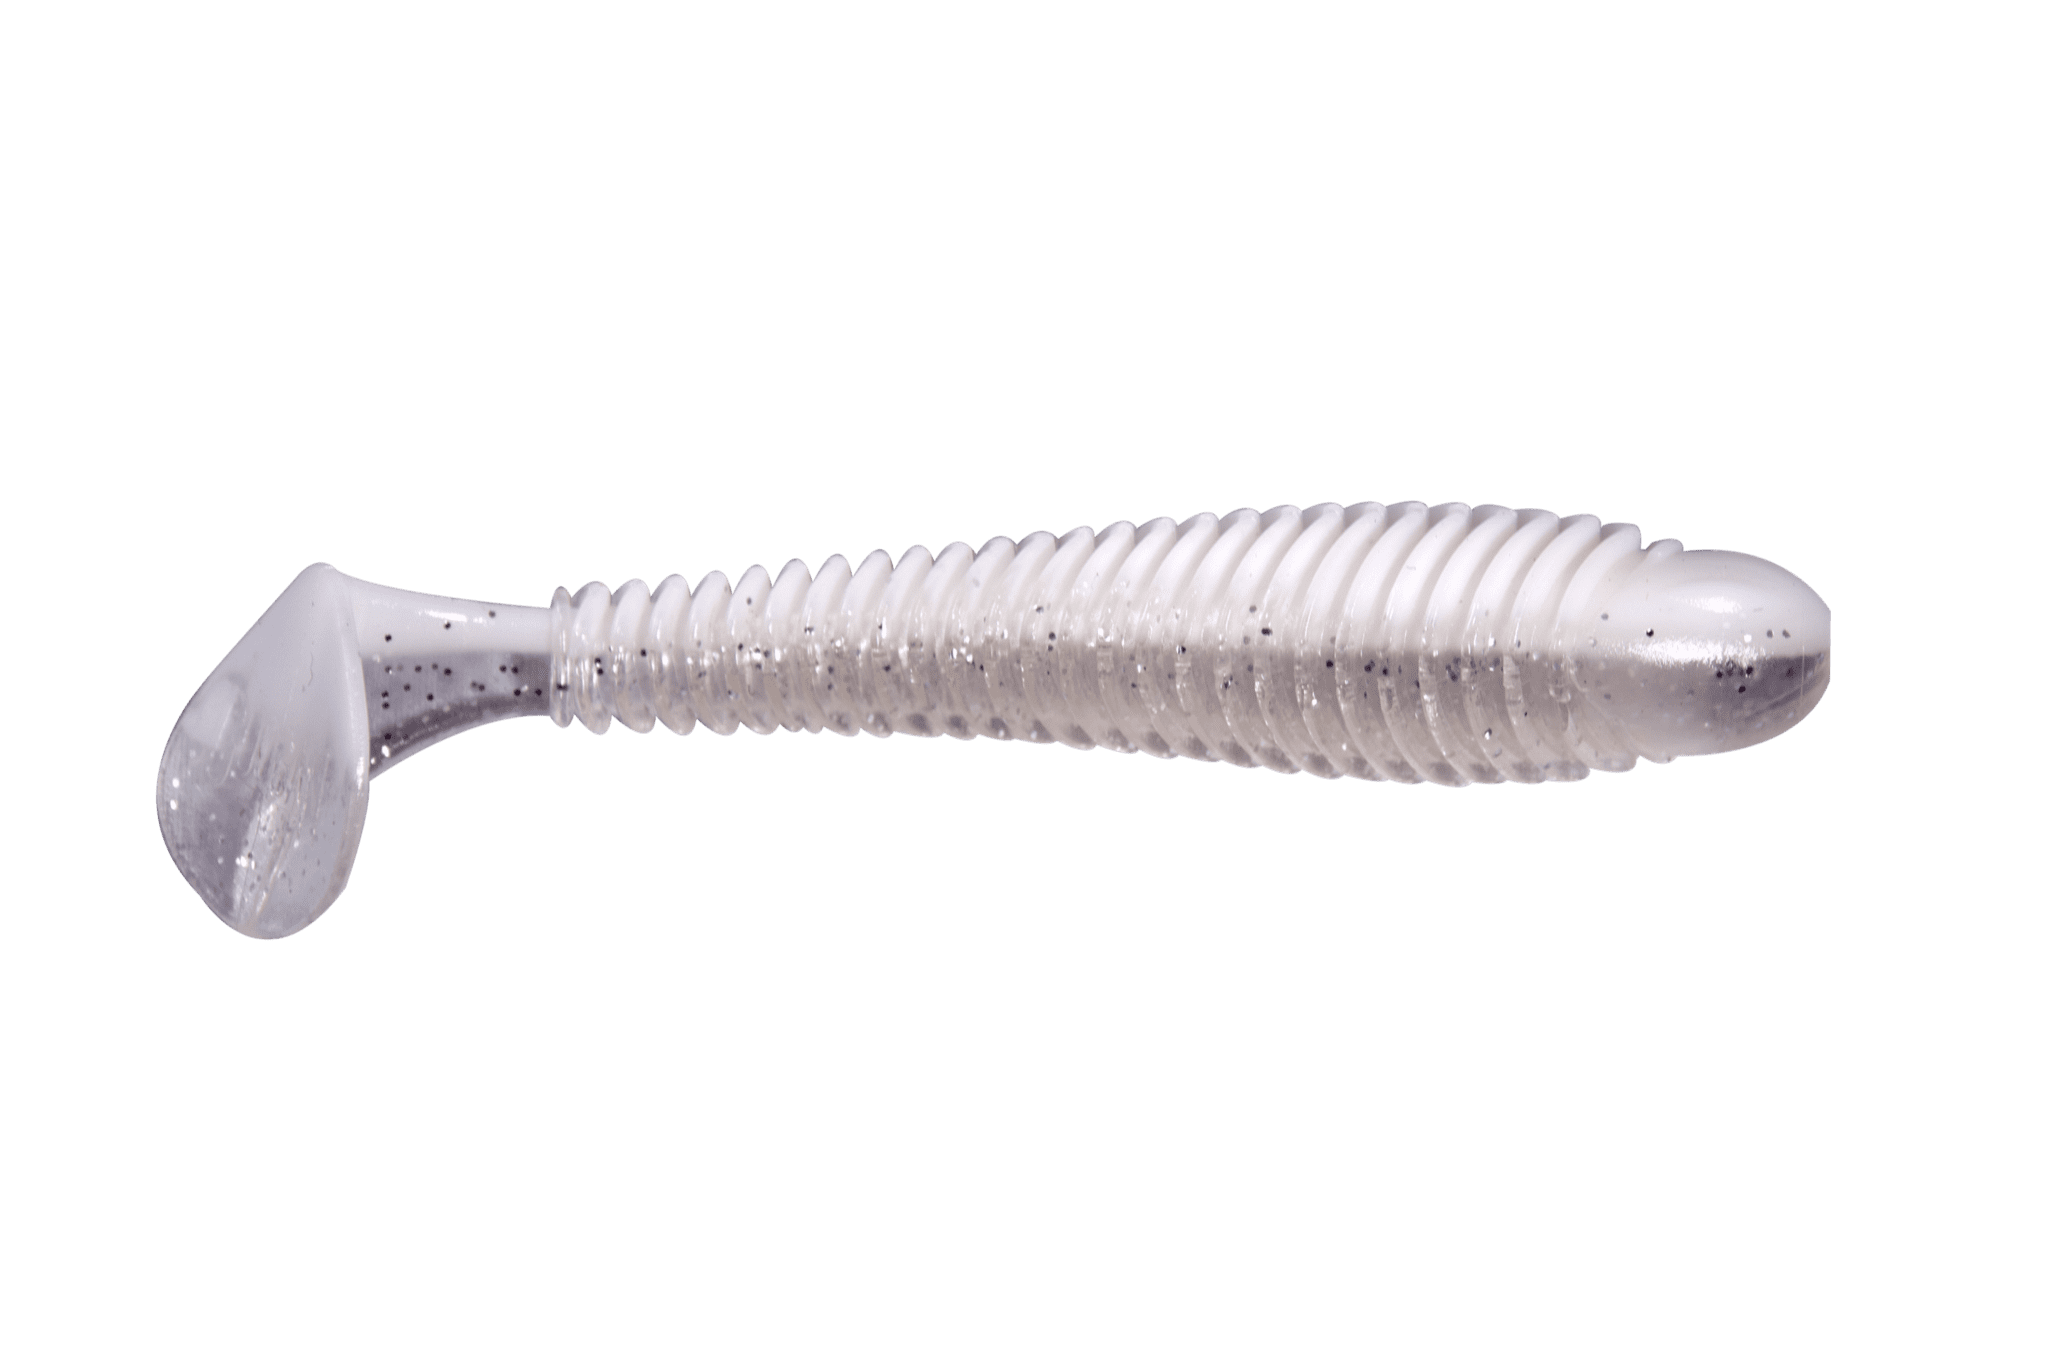 Googan Baits Saucy Swimmer - 3.8in - White Pearl Shad